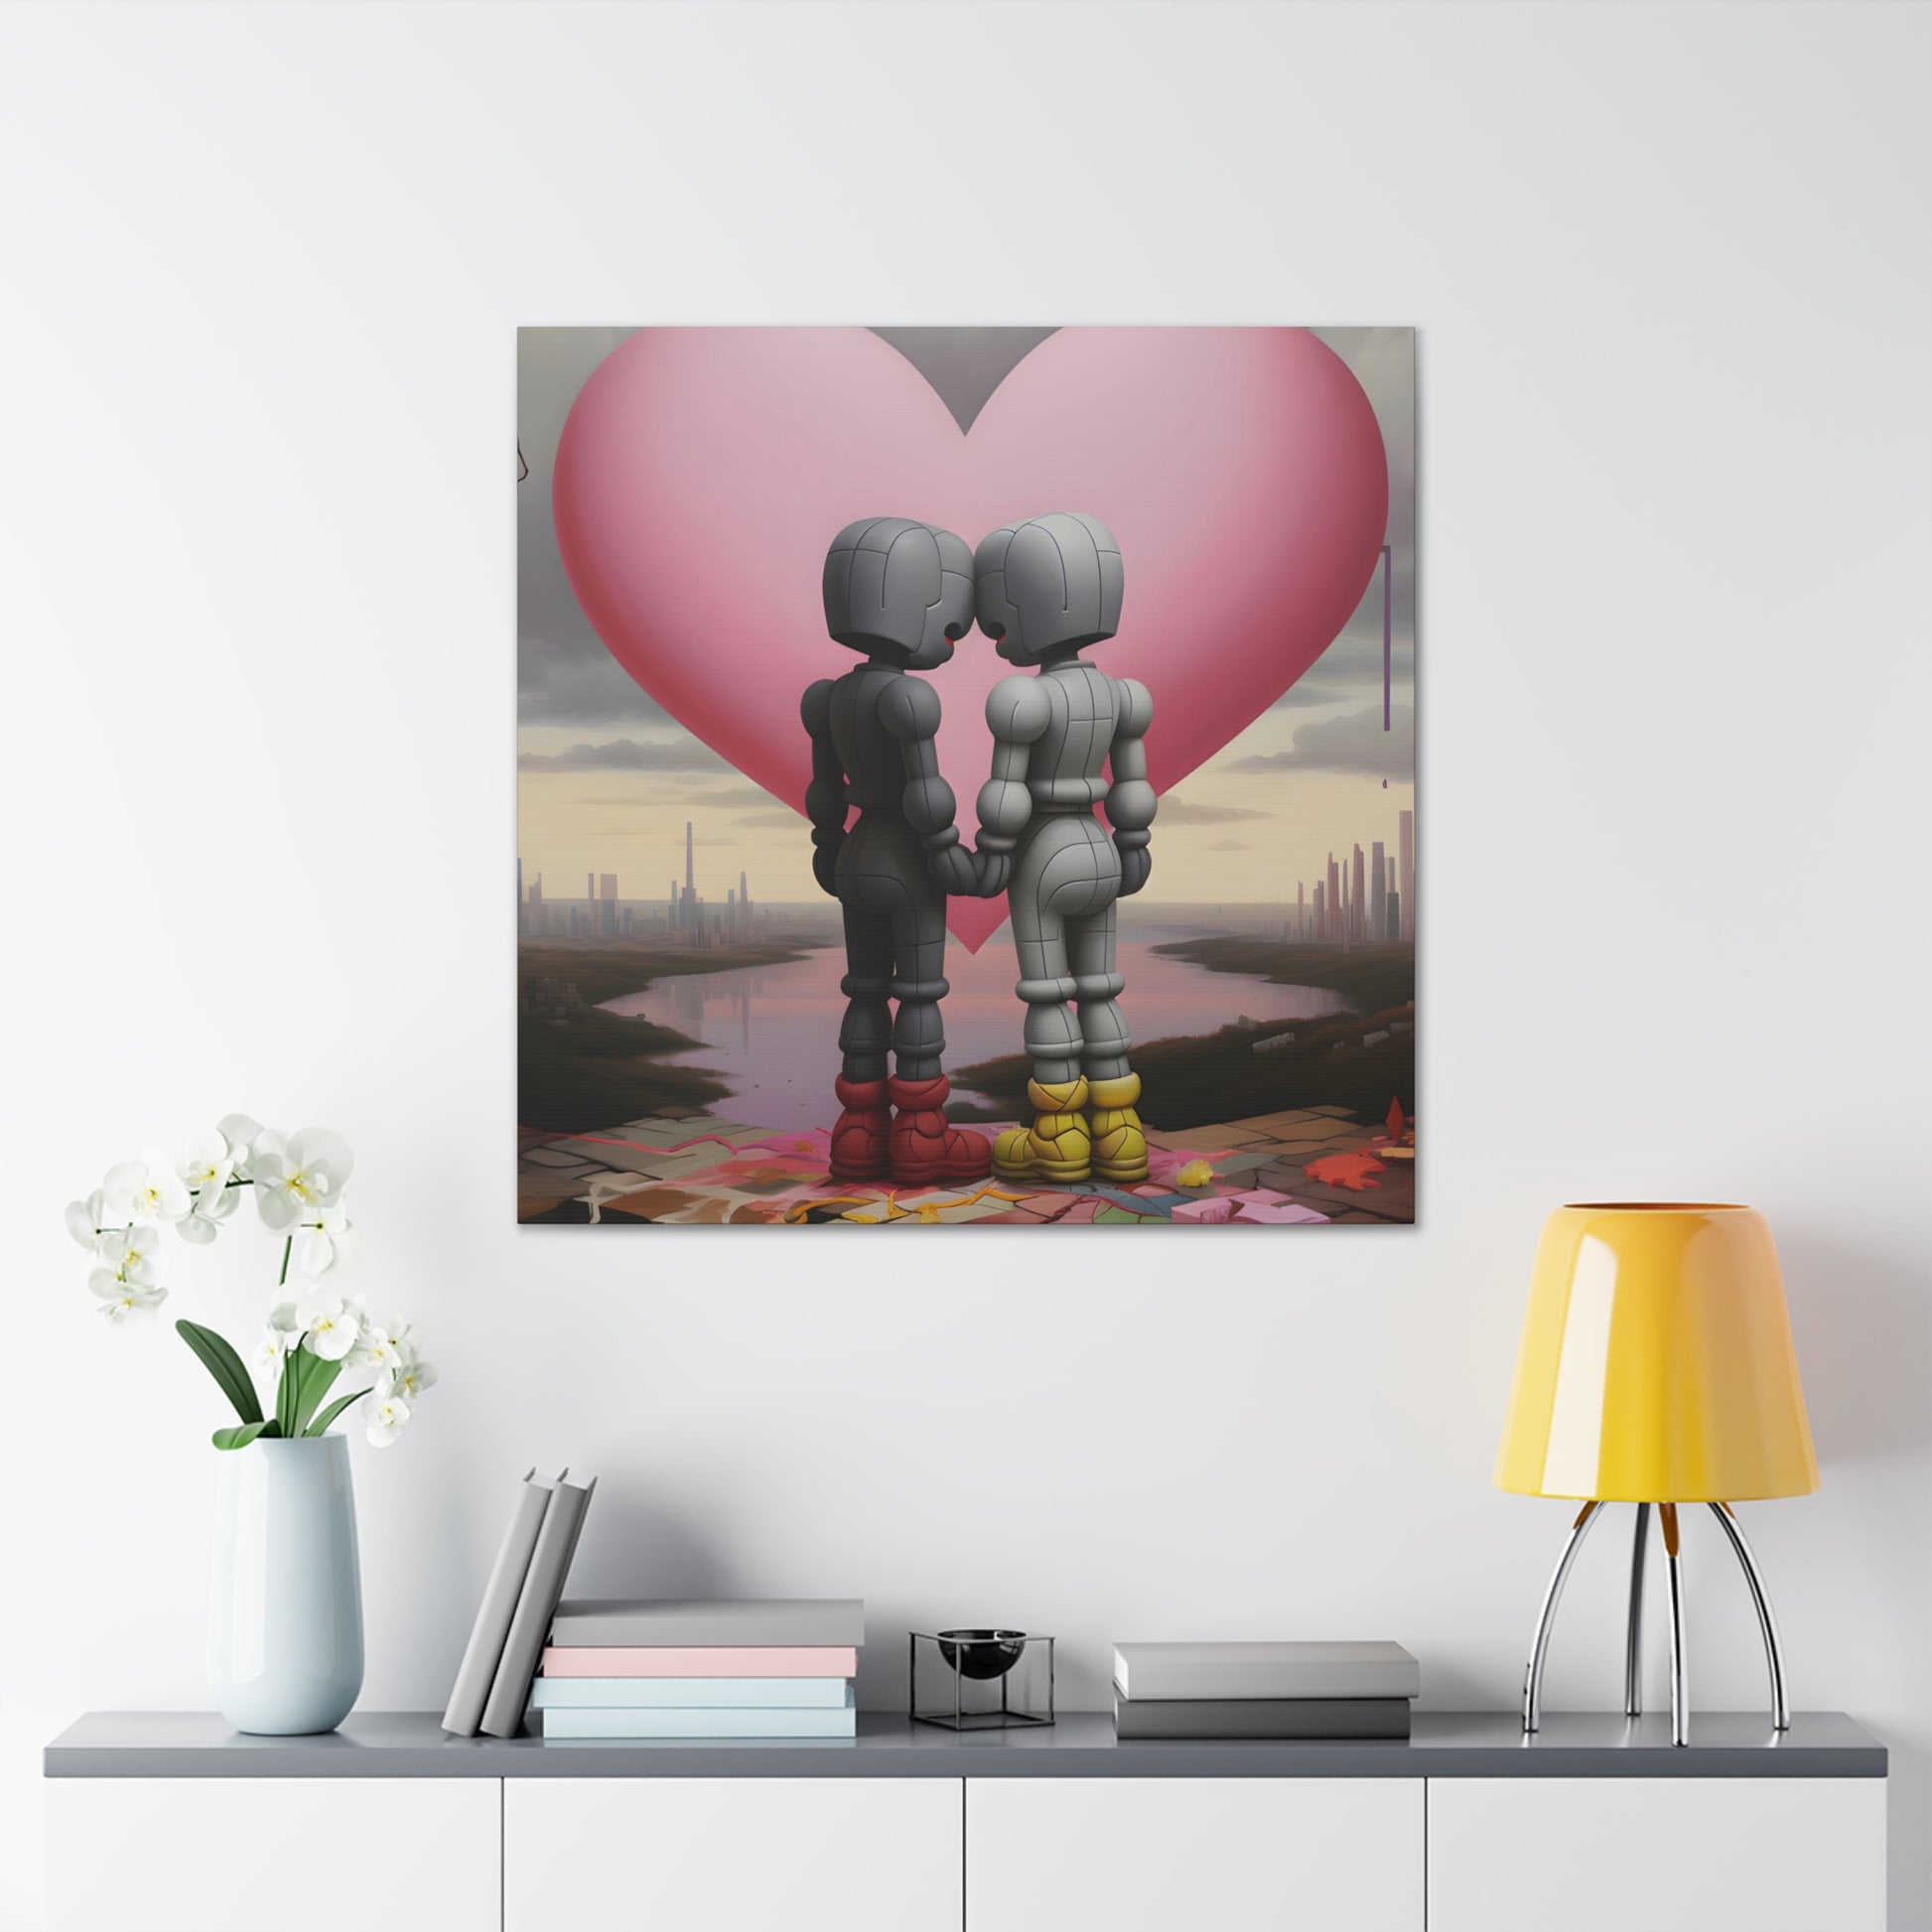 in situ 5 Contemporary artwork by Archer Dent, reflecting on connection in a mechanized era, blending urban surrealism with a tender embrace against a stark cityscape, provoking thoughts on love amidst modernity.